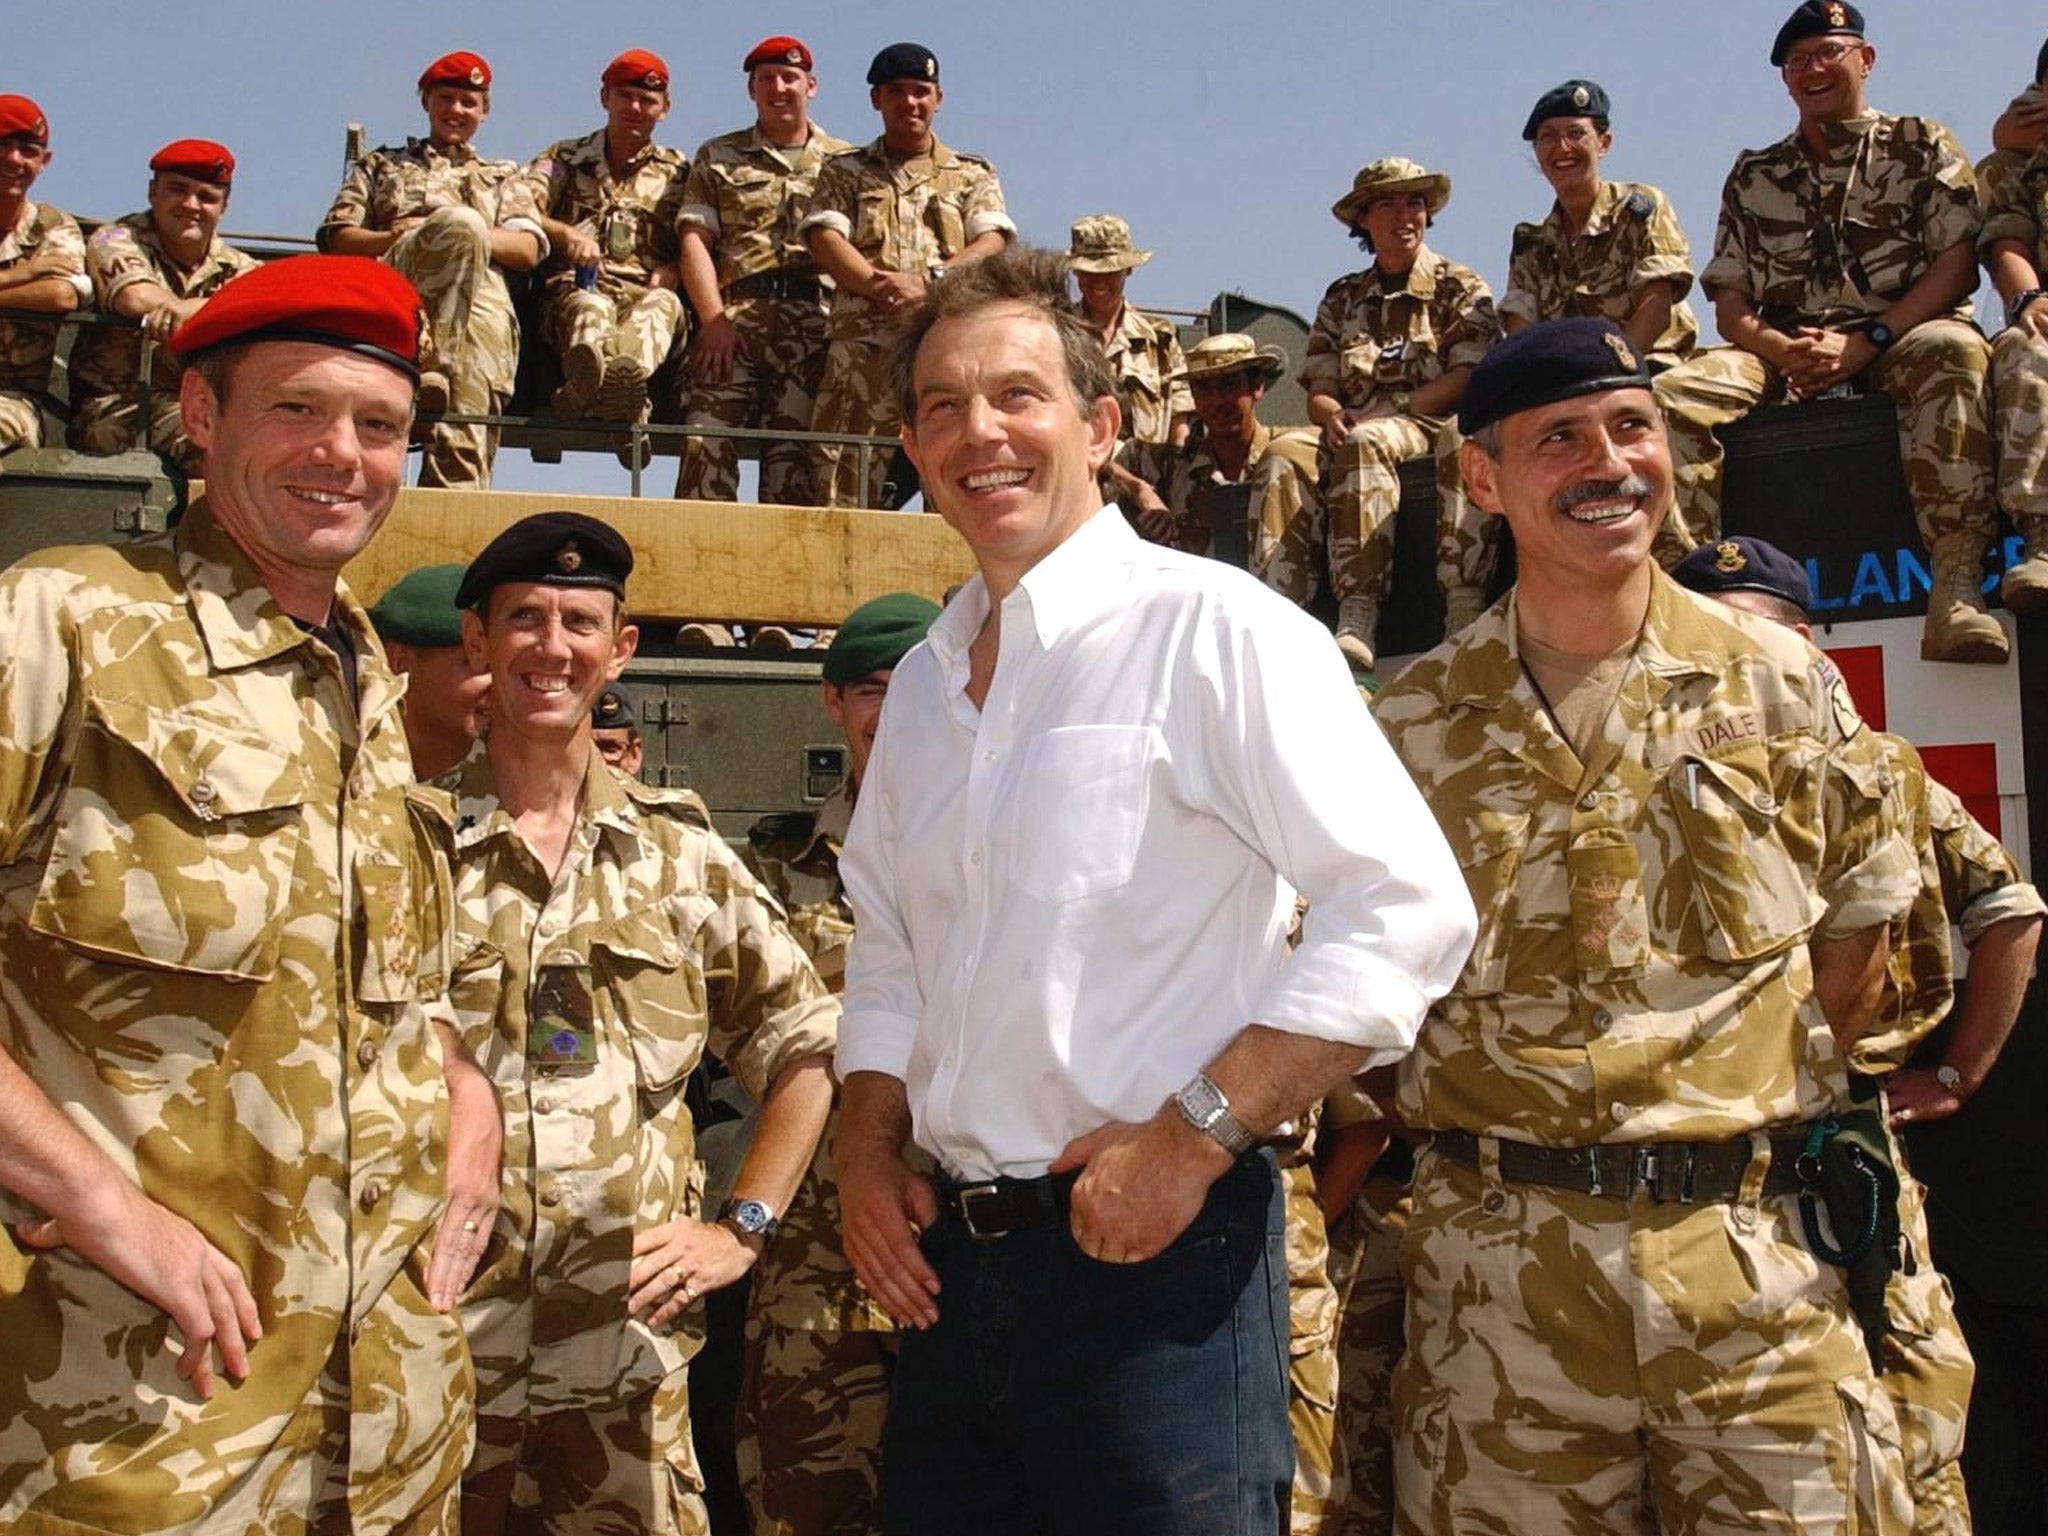 Tony Blair with troops in Iraq in 2003